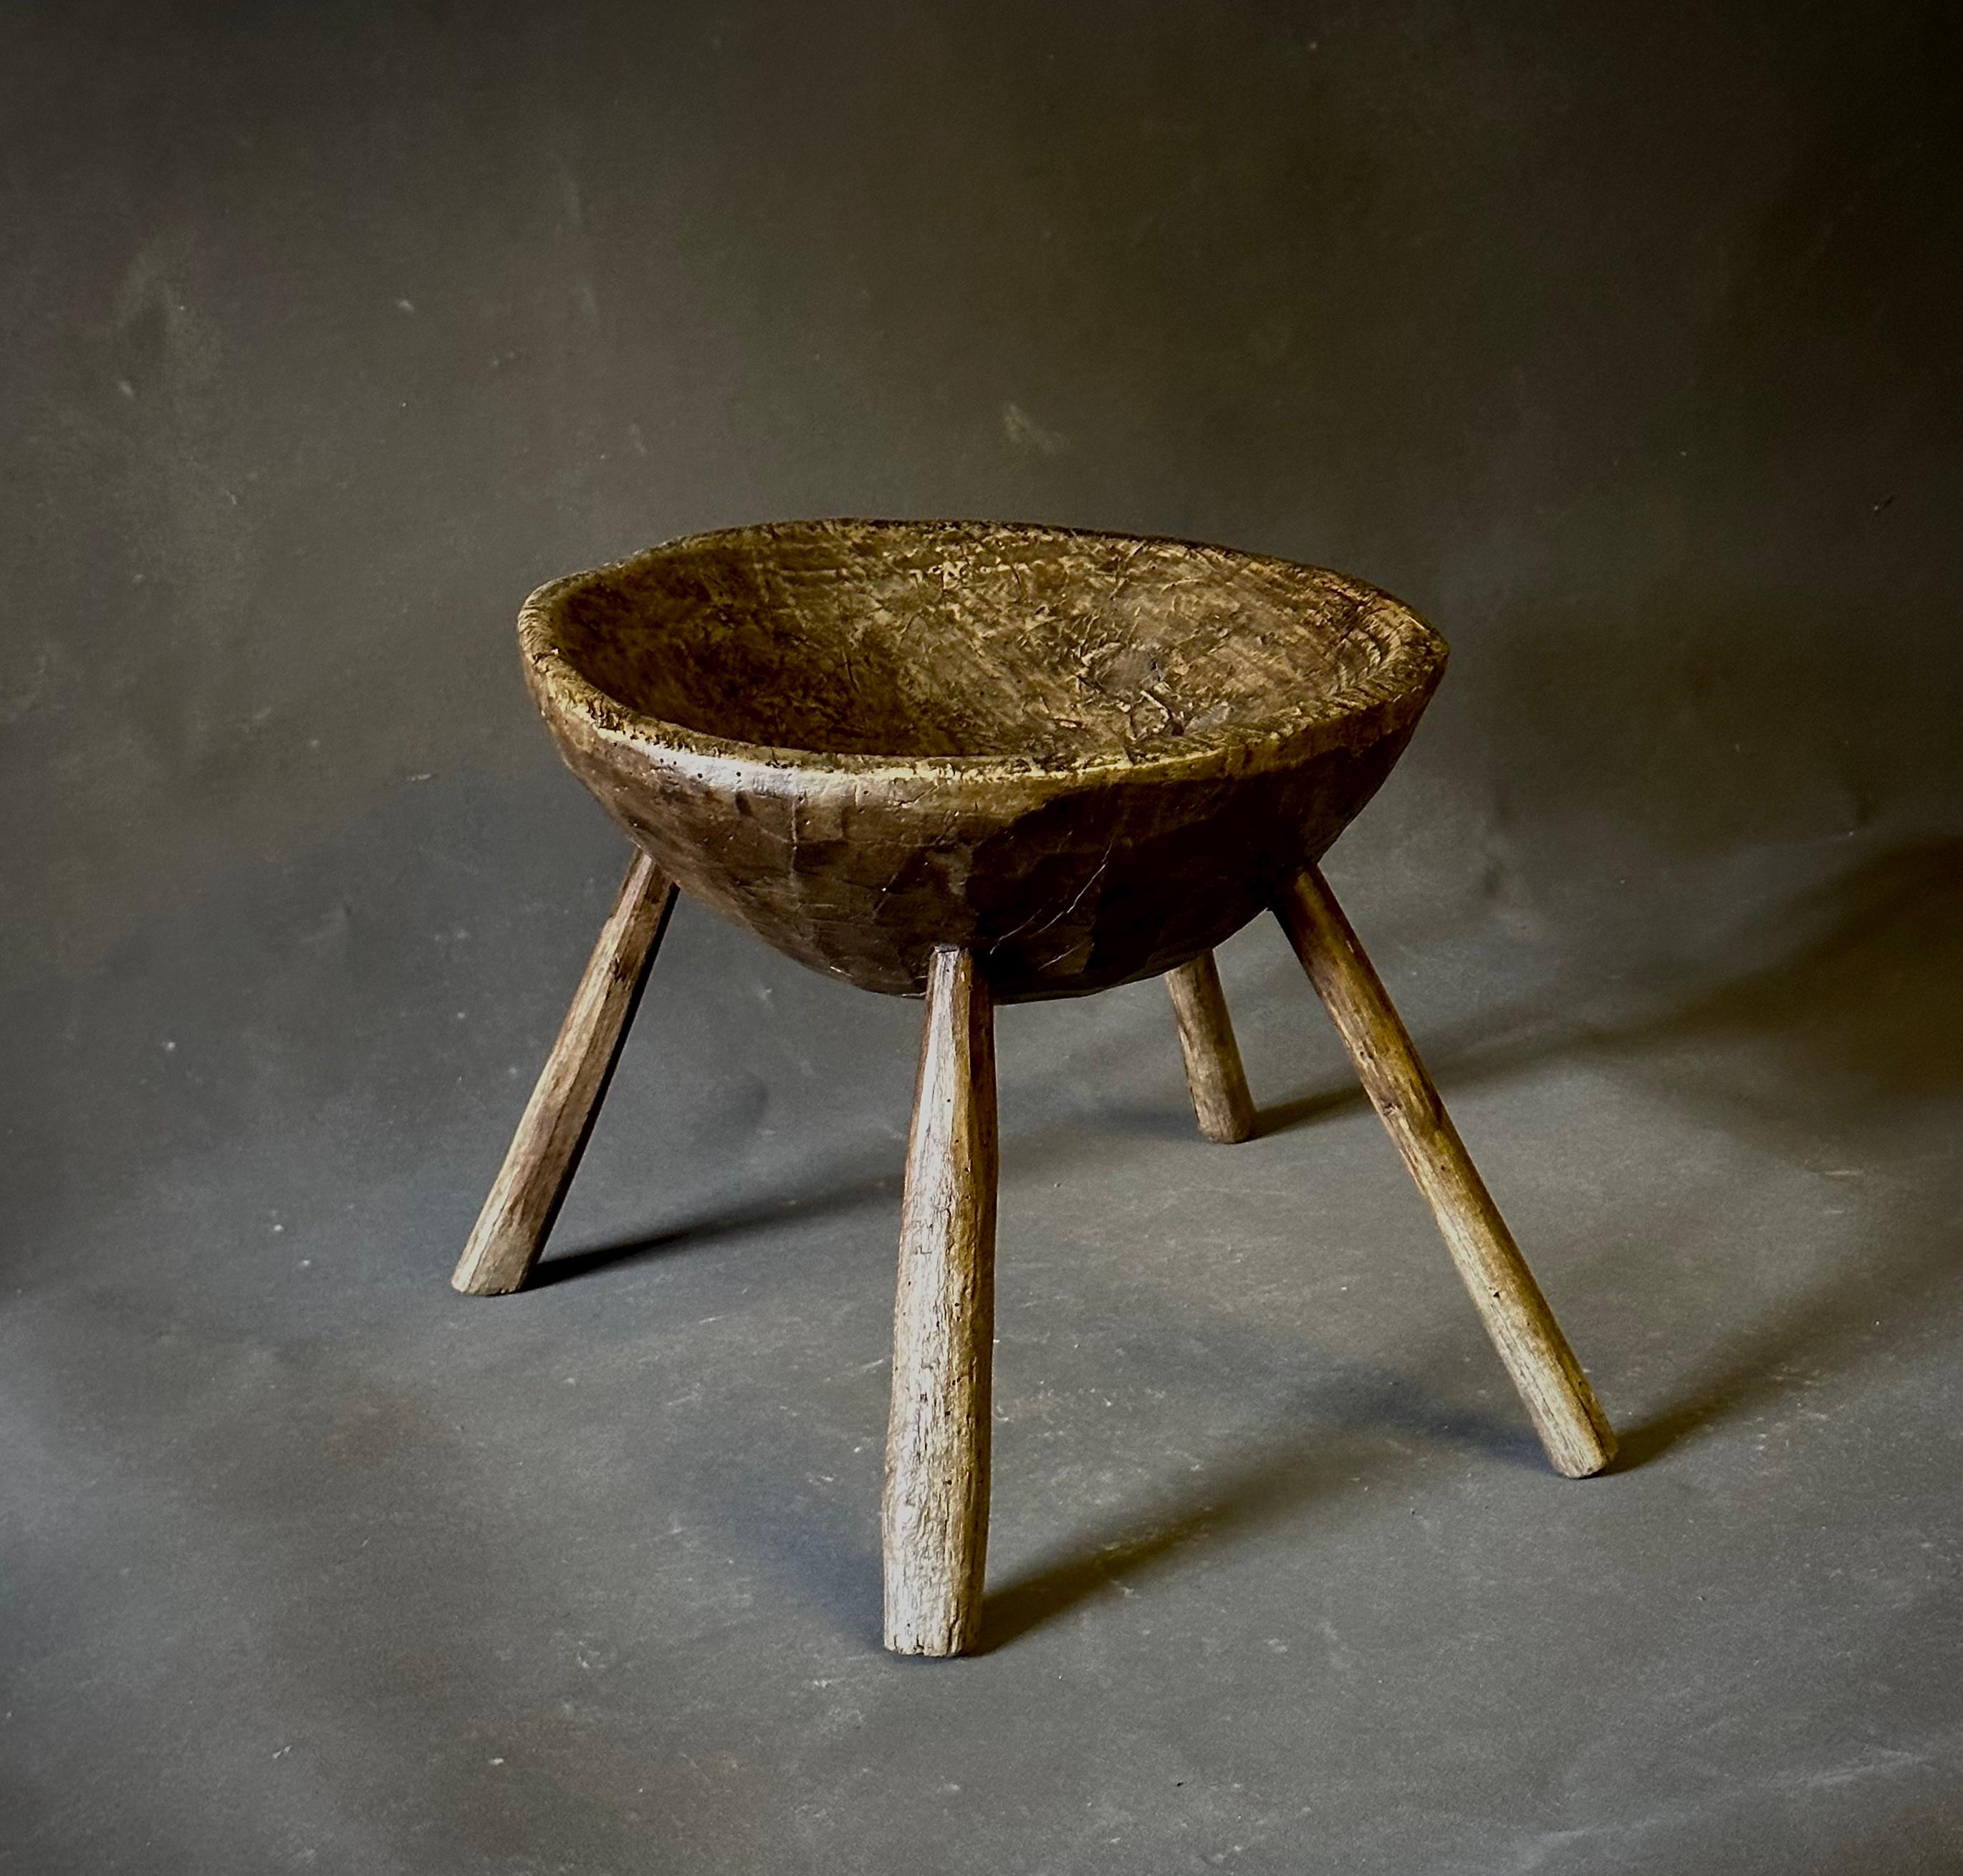 Belgian 19th century primitive wooden milking stool. Rustic and elemental of form, its cupped seat, four-legged base, and low-to-the-ground orientation make this a unique seating addition or sculptural accent piece. 

Belgium, circa